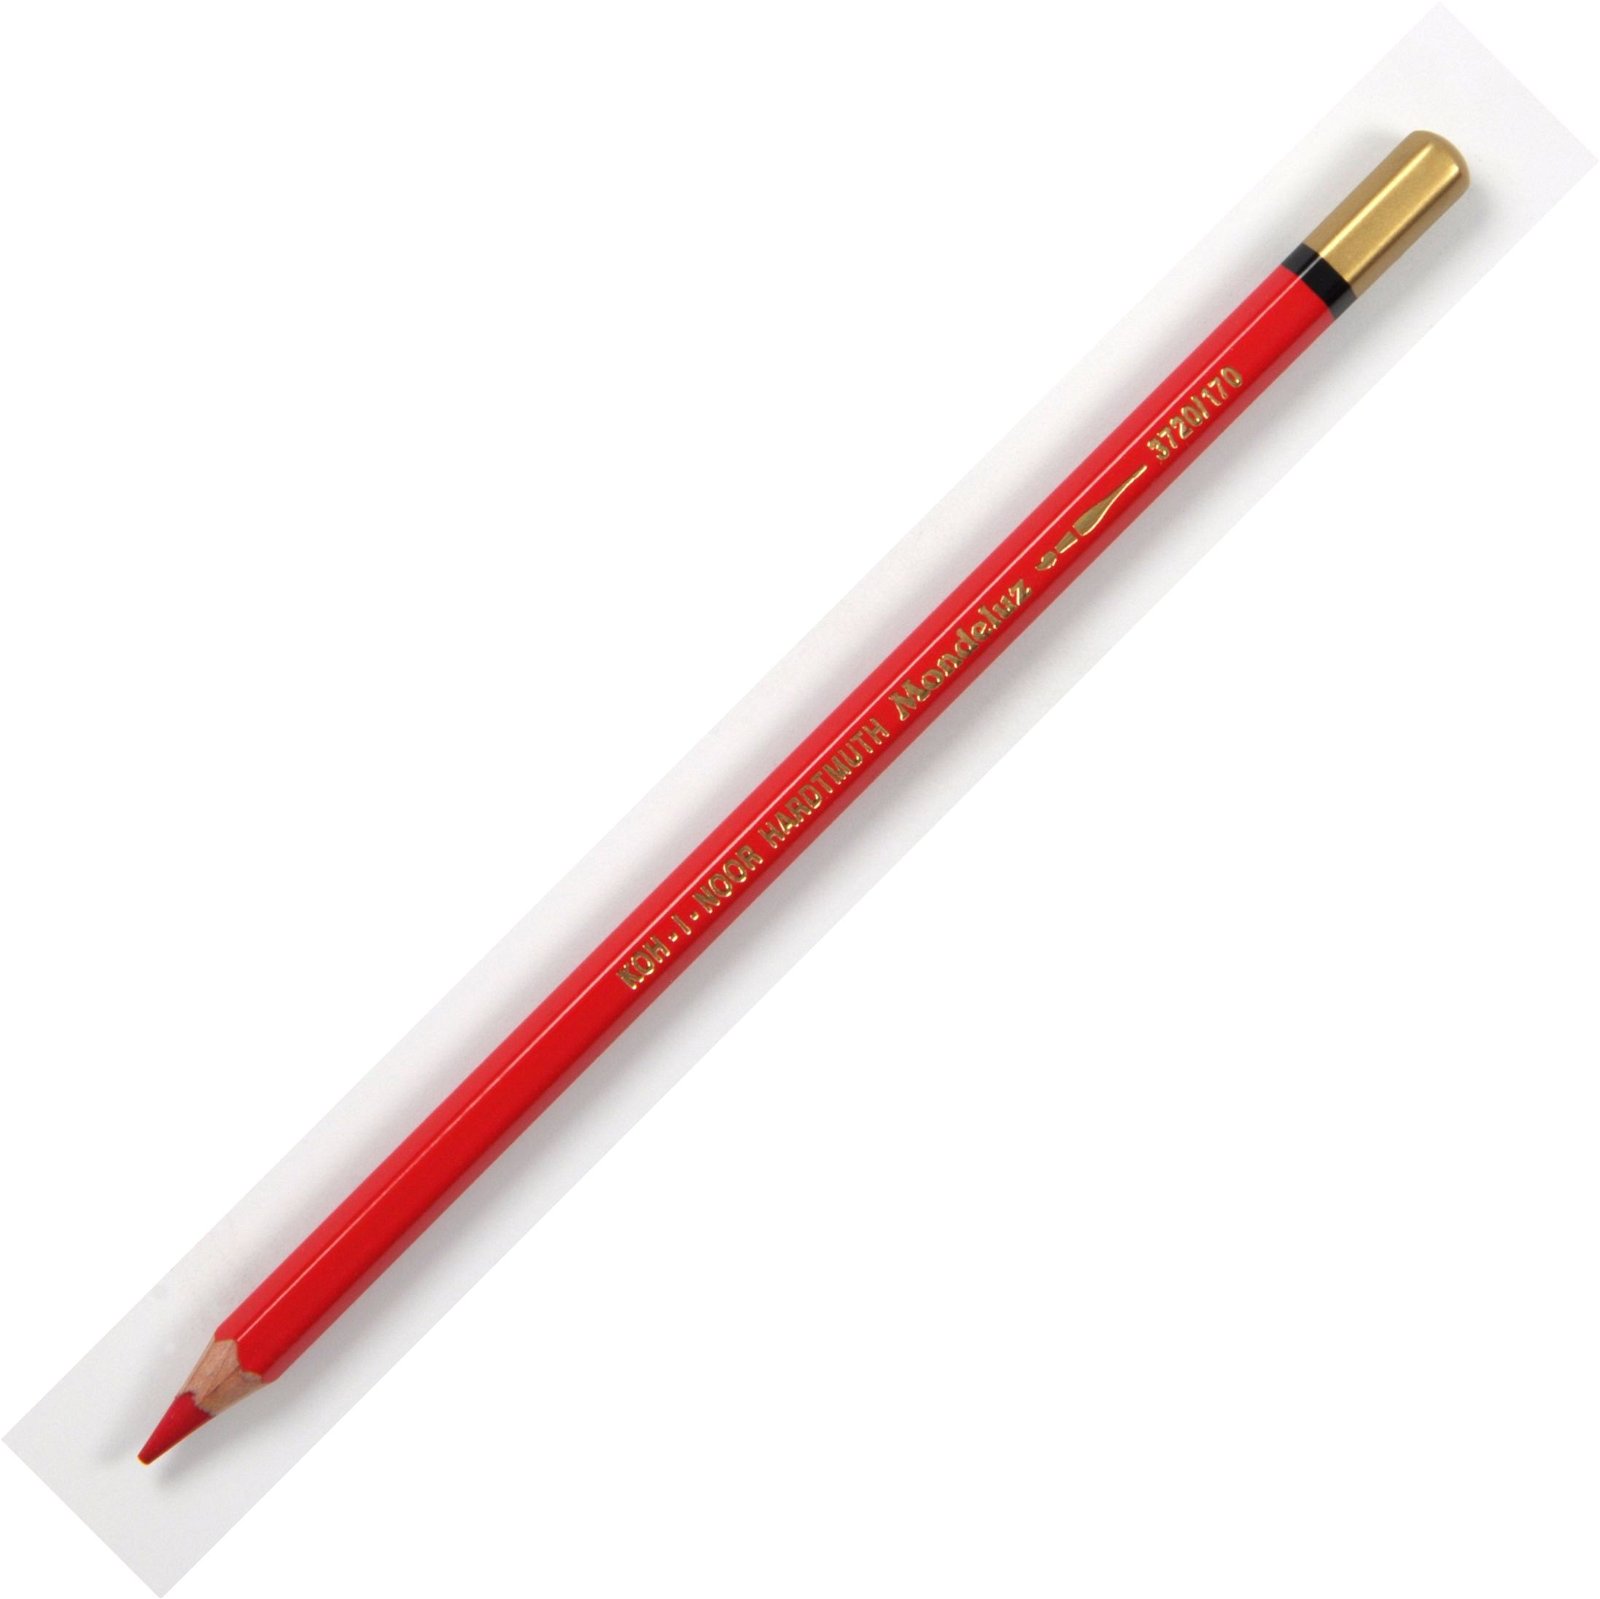 Koh-I-Noor Mondeluz Aquarell Artist's Water Soluble Coloured Pencil - Pyrrole Red (170)